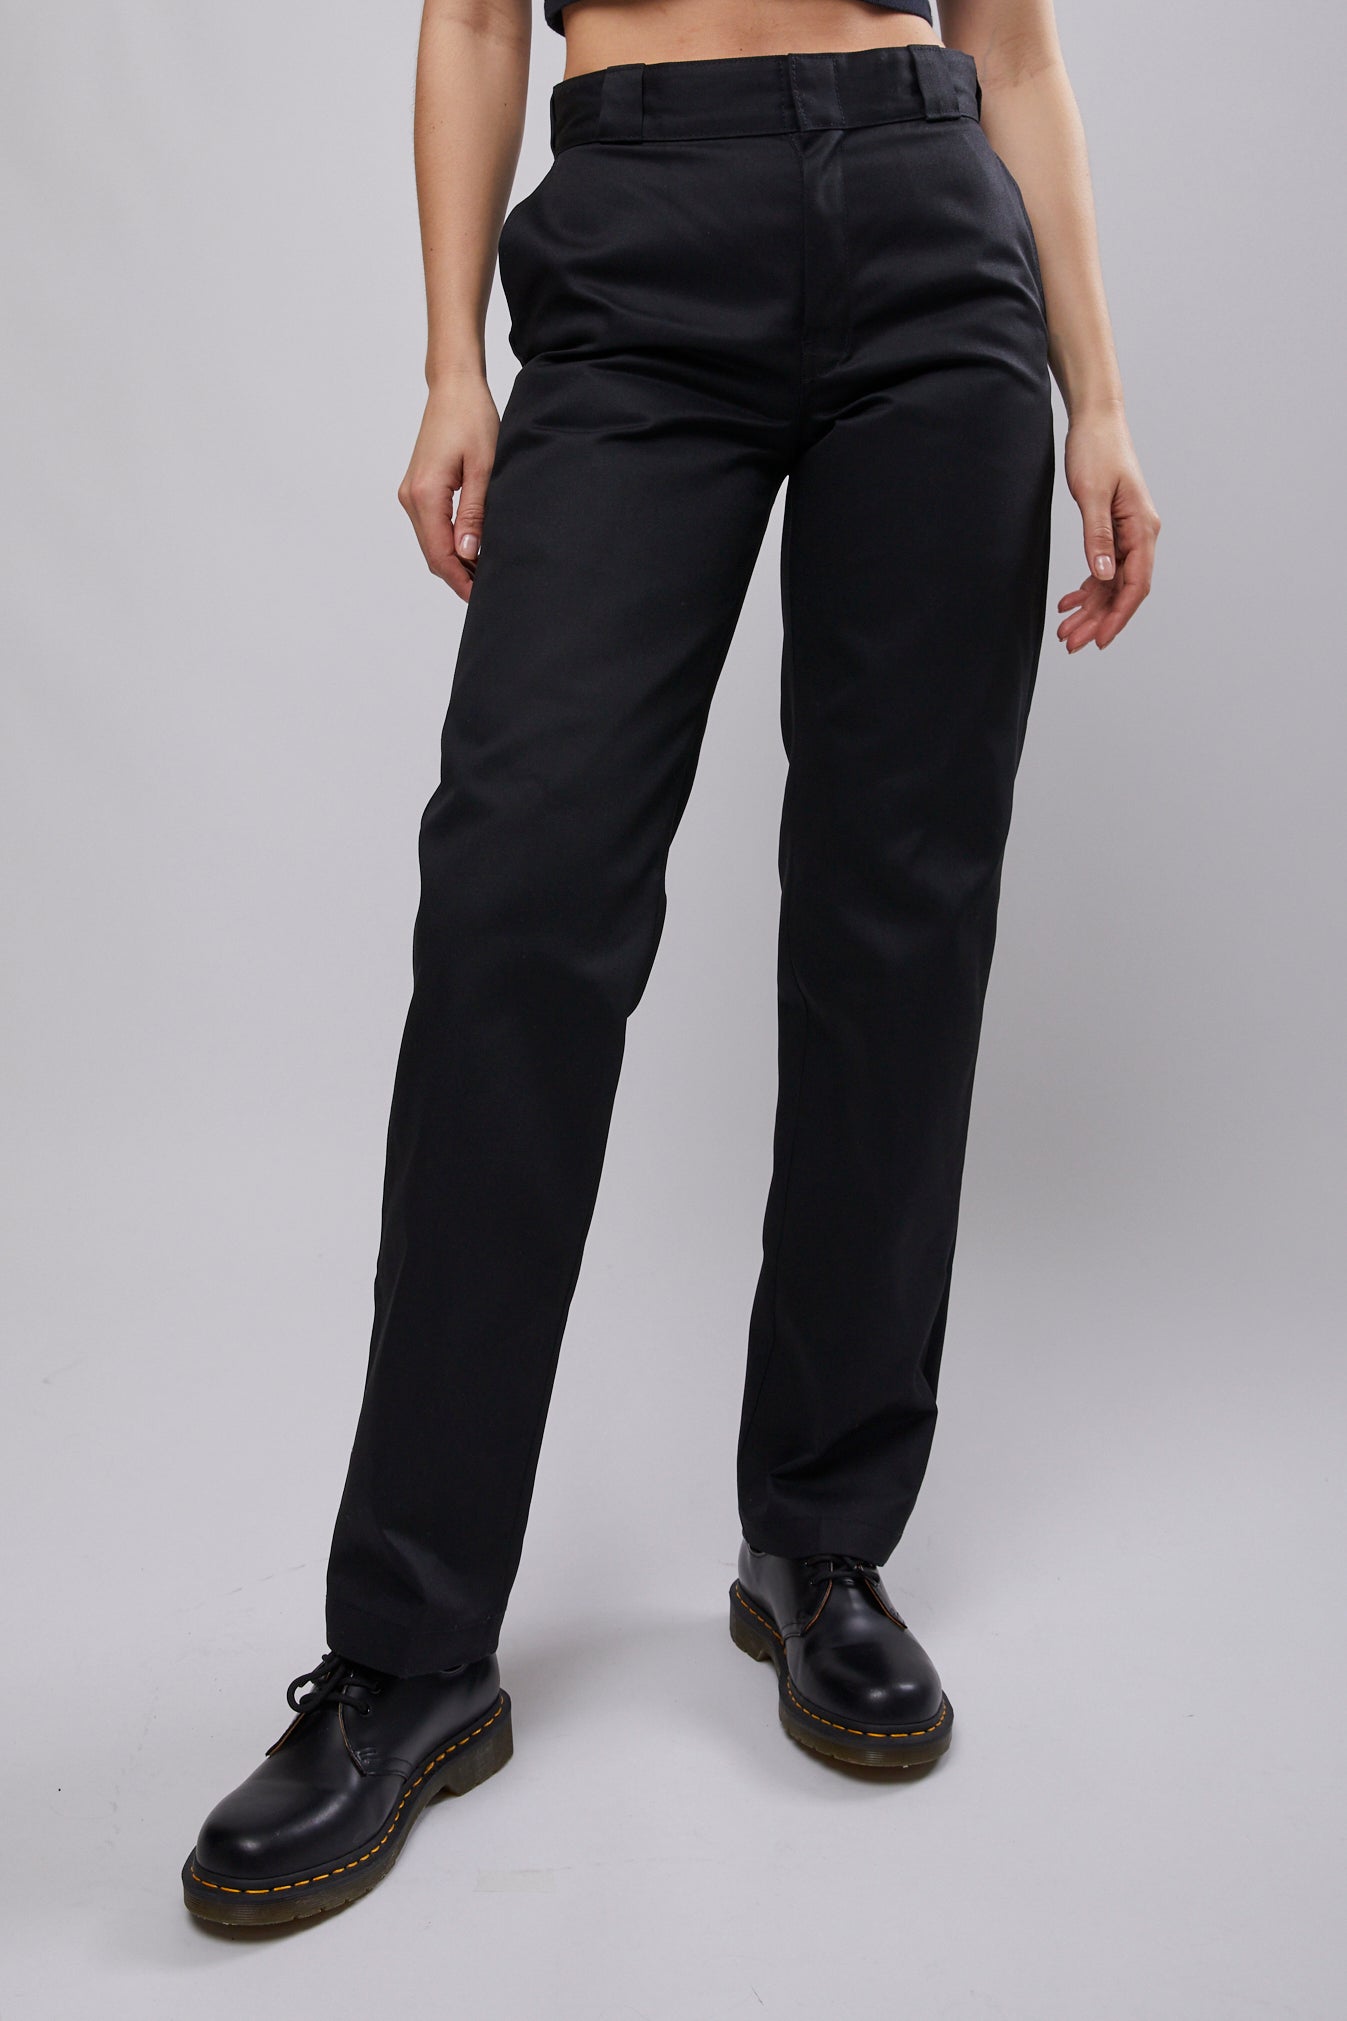 FP875 High Rise Tapered Pant | North Beach